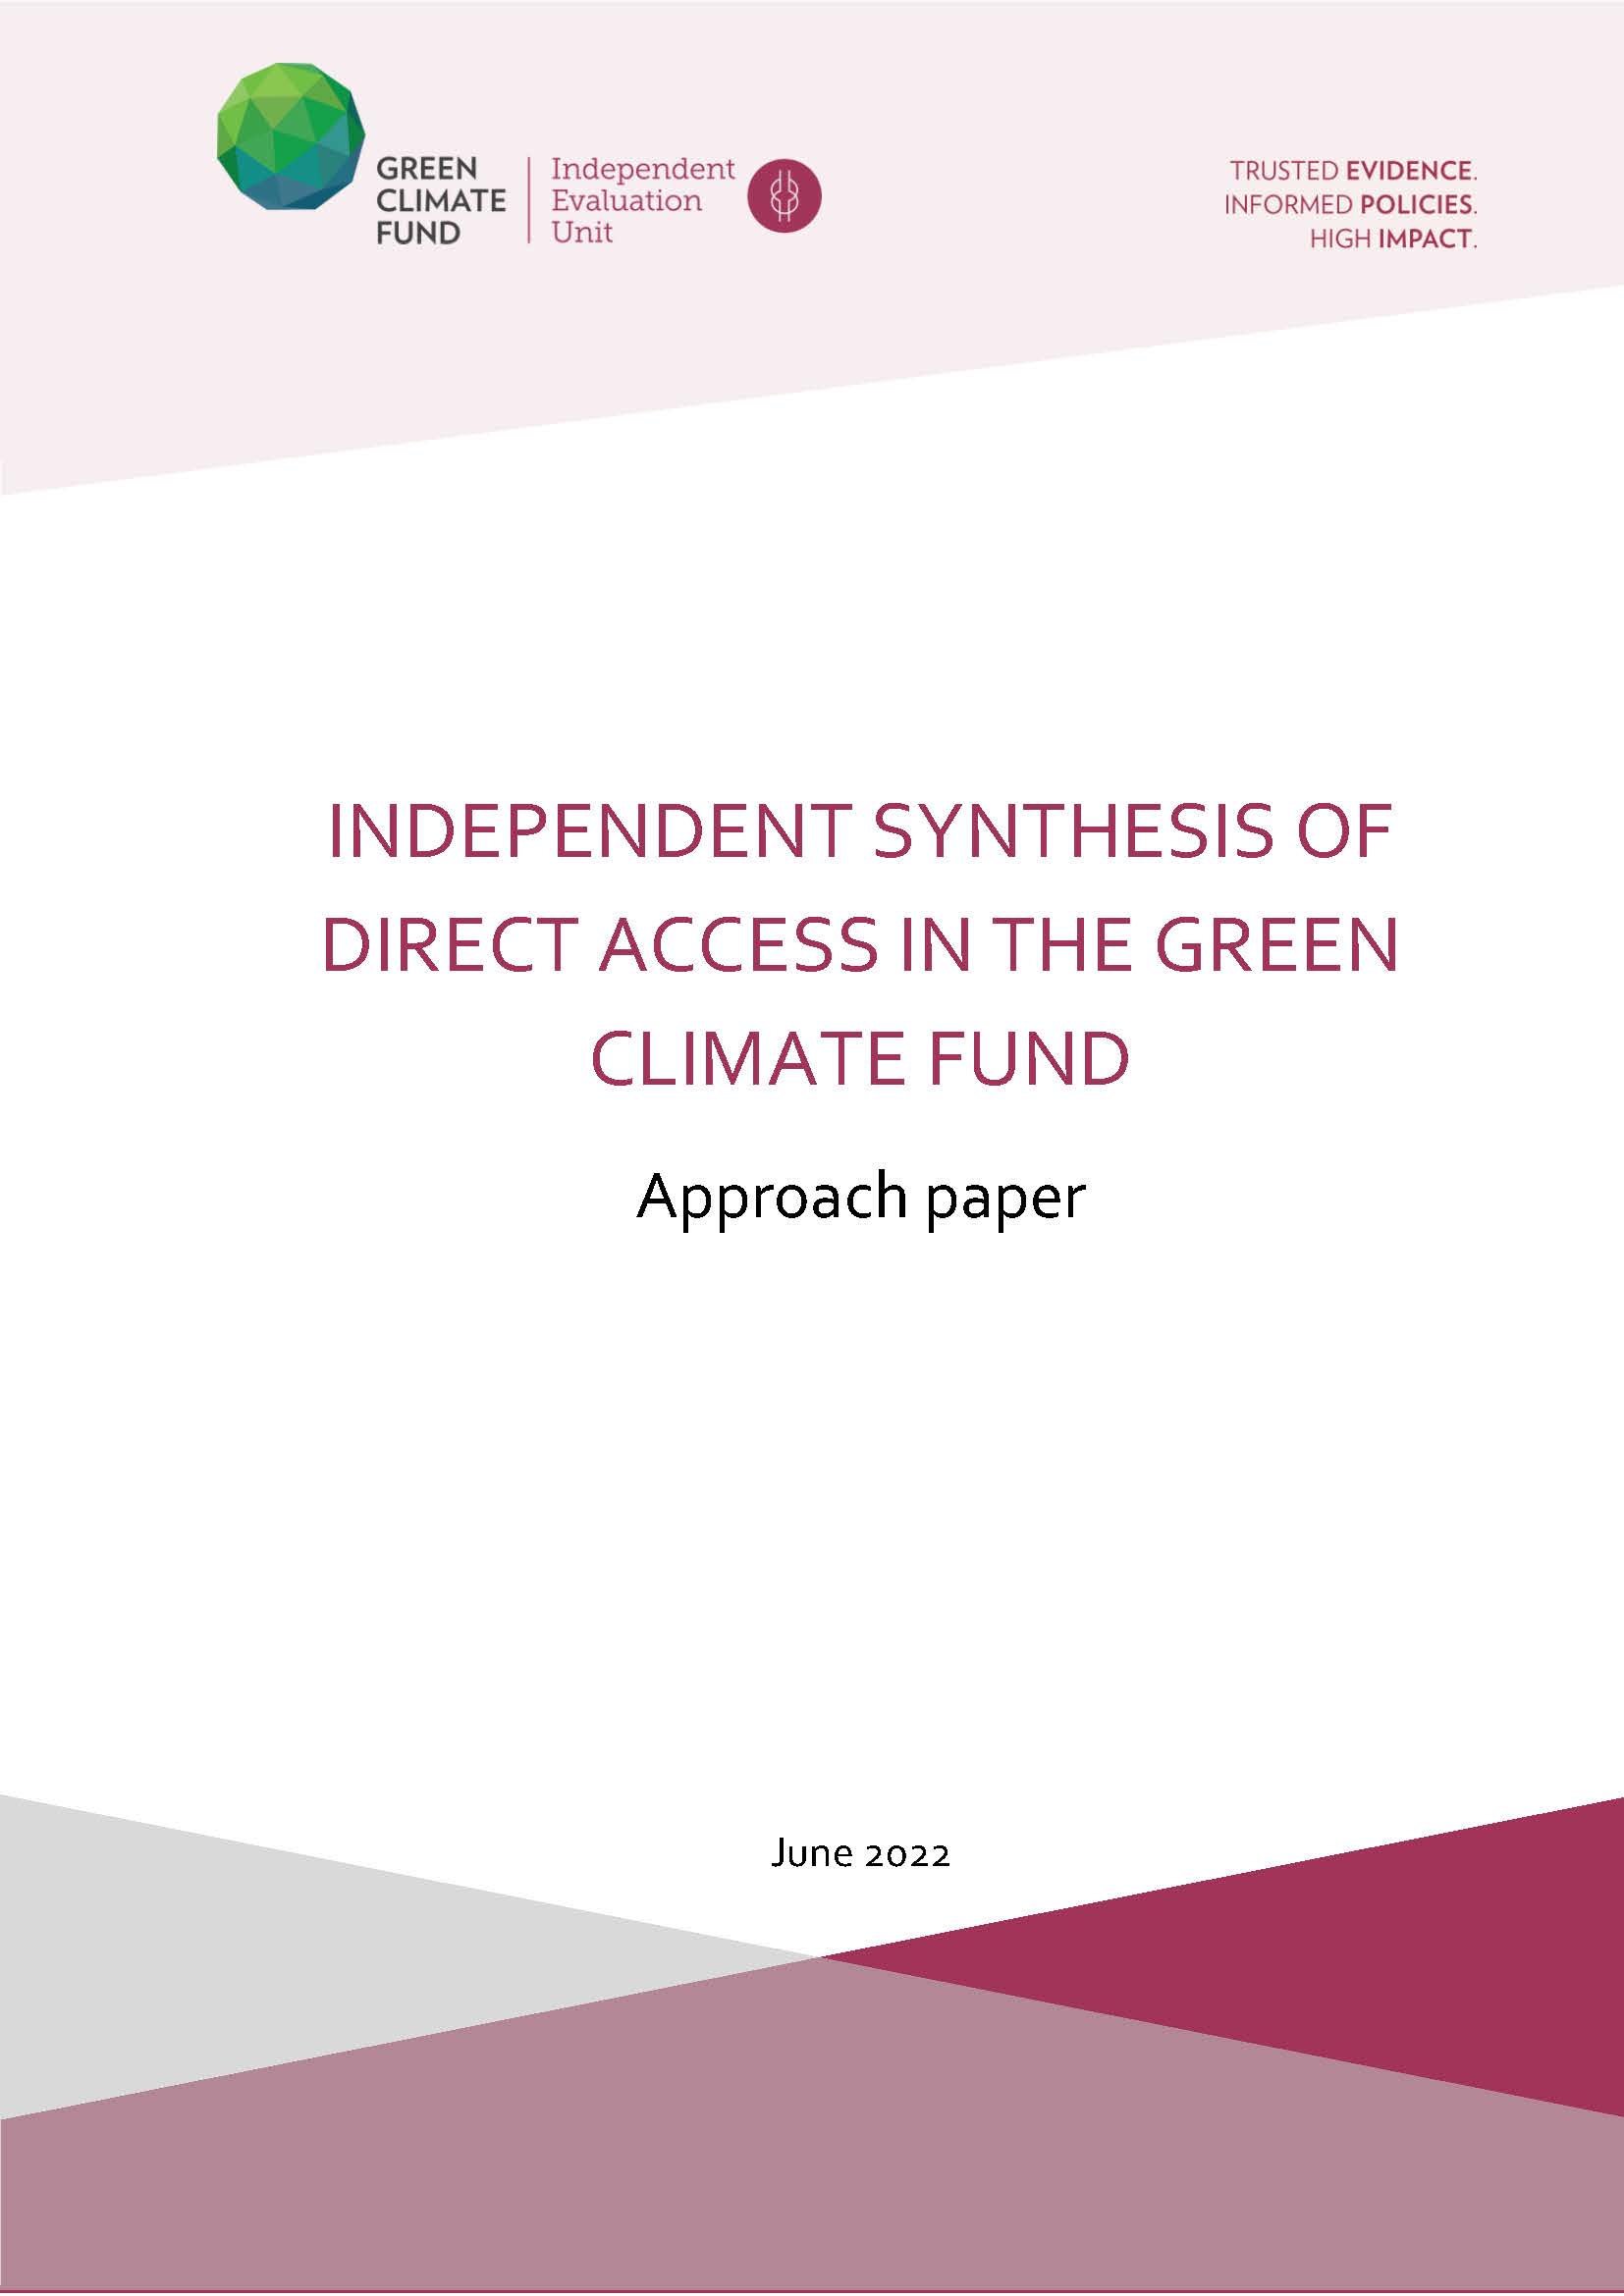 Document cover for Approach paper for the Independent Synthesis of Direct Access in the Green Climate Fund